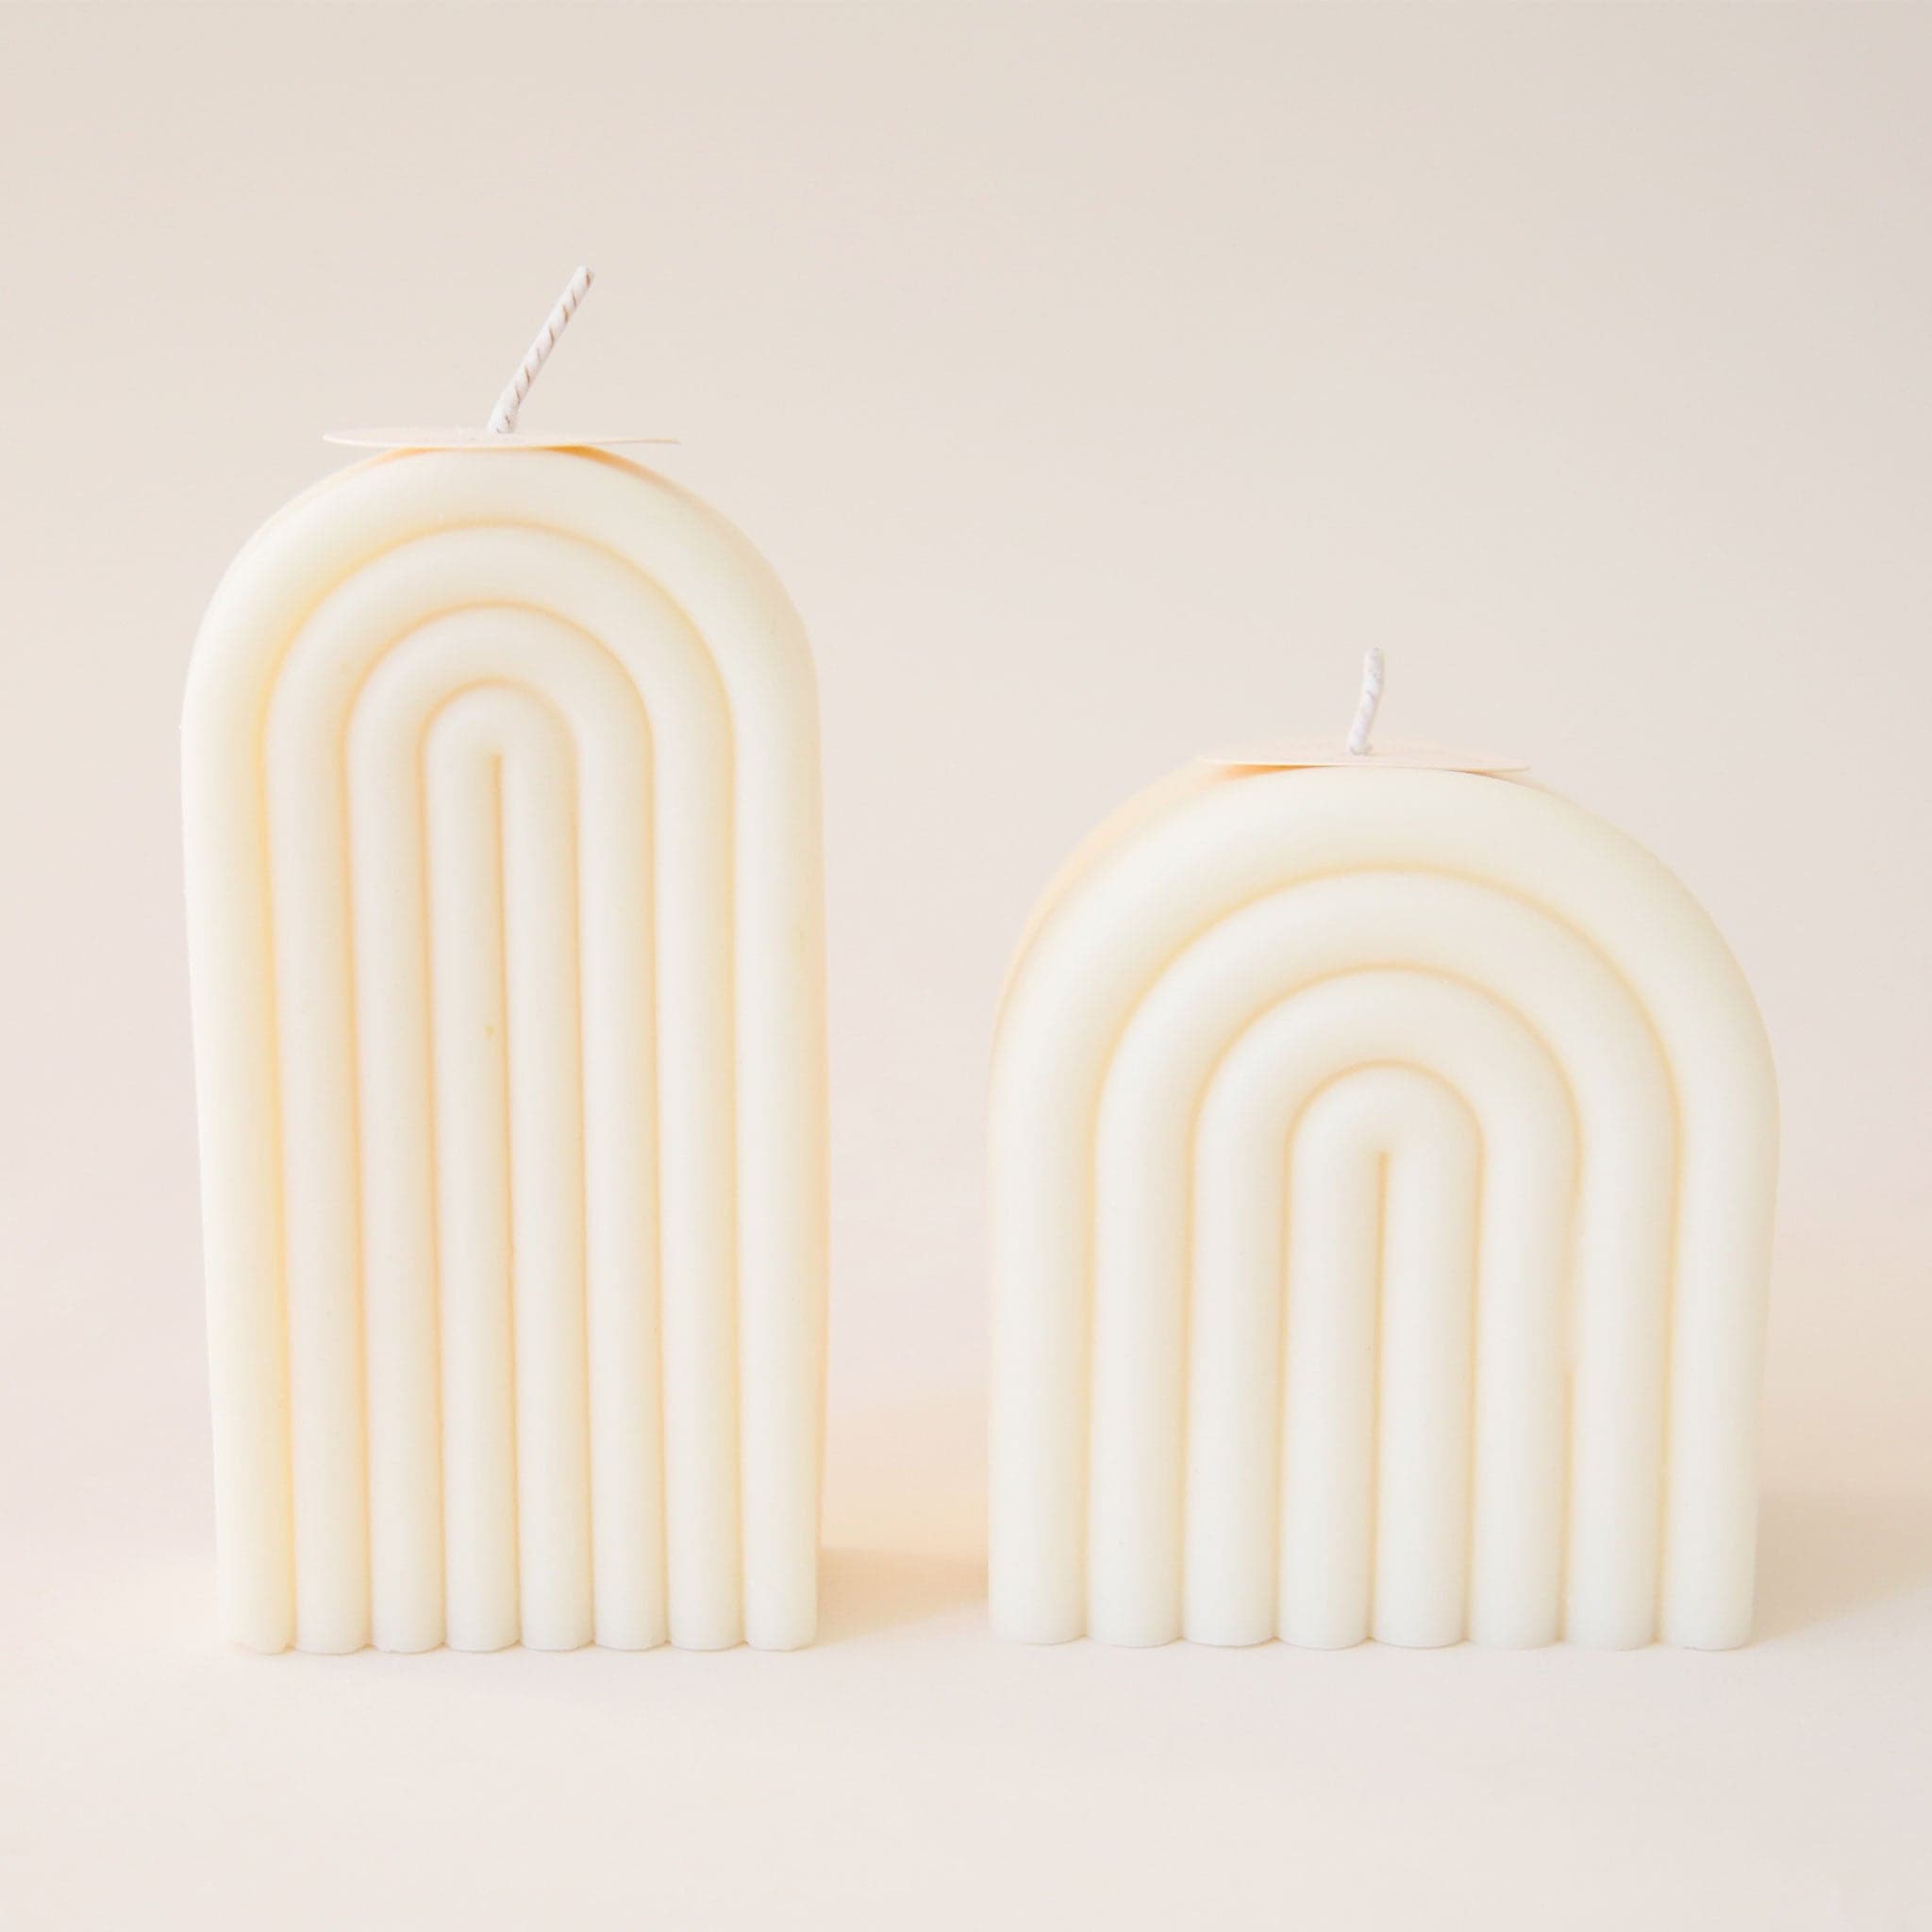 Two light cream arch shaped candles, one tall and one short. Each is carved with rainbow-shaped curves and has its own white wick sprouting from the top.